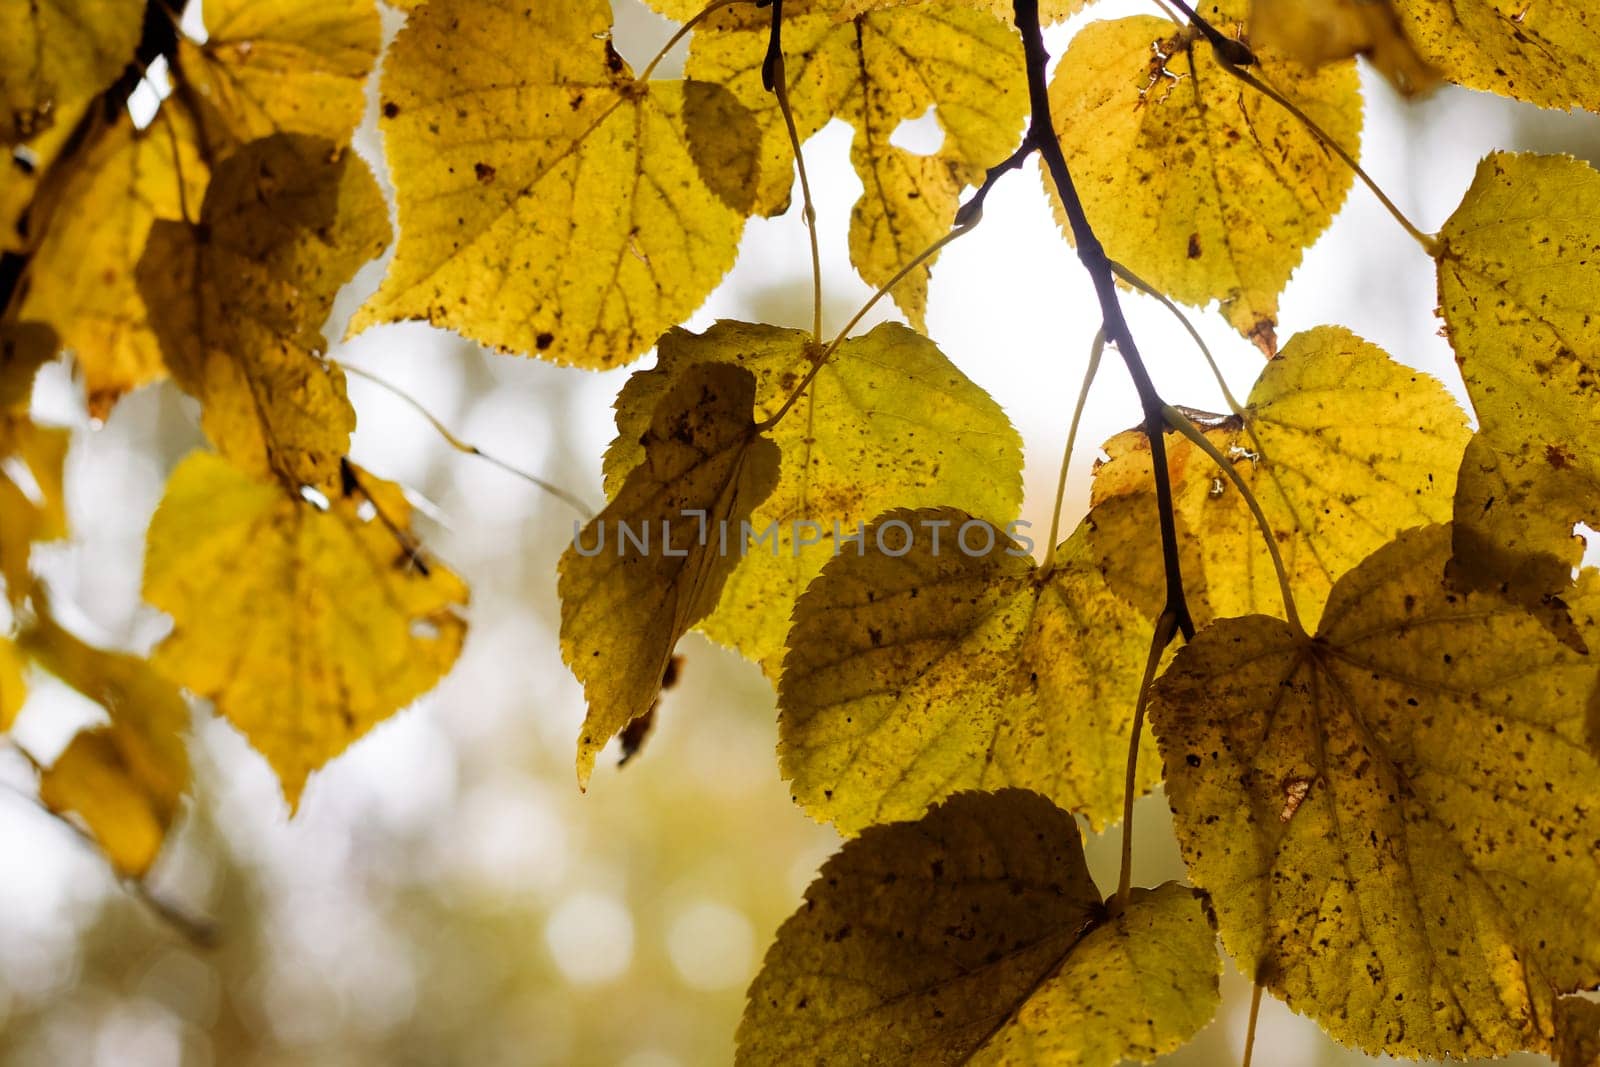 Yellow leaves on tree branches with dew drops close up